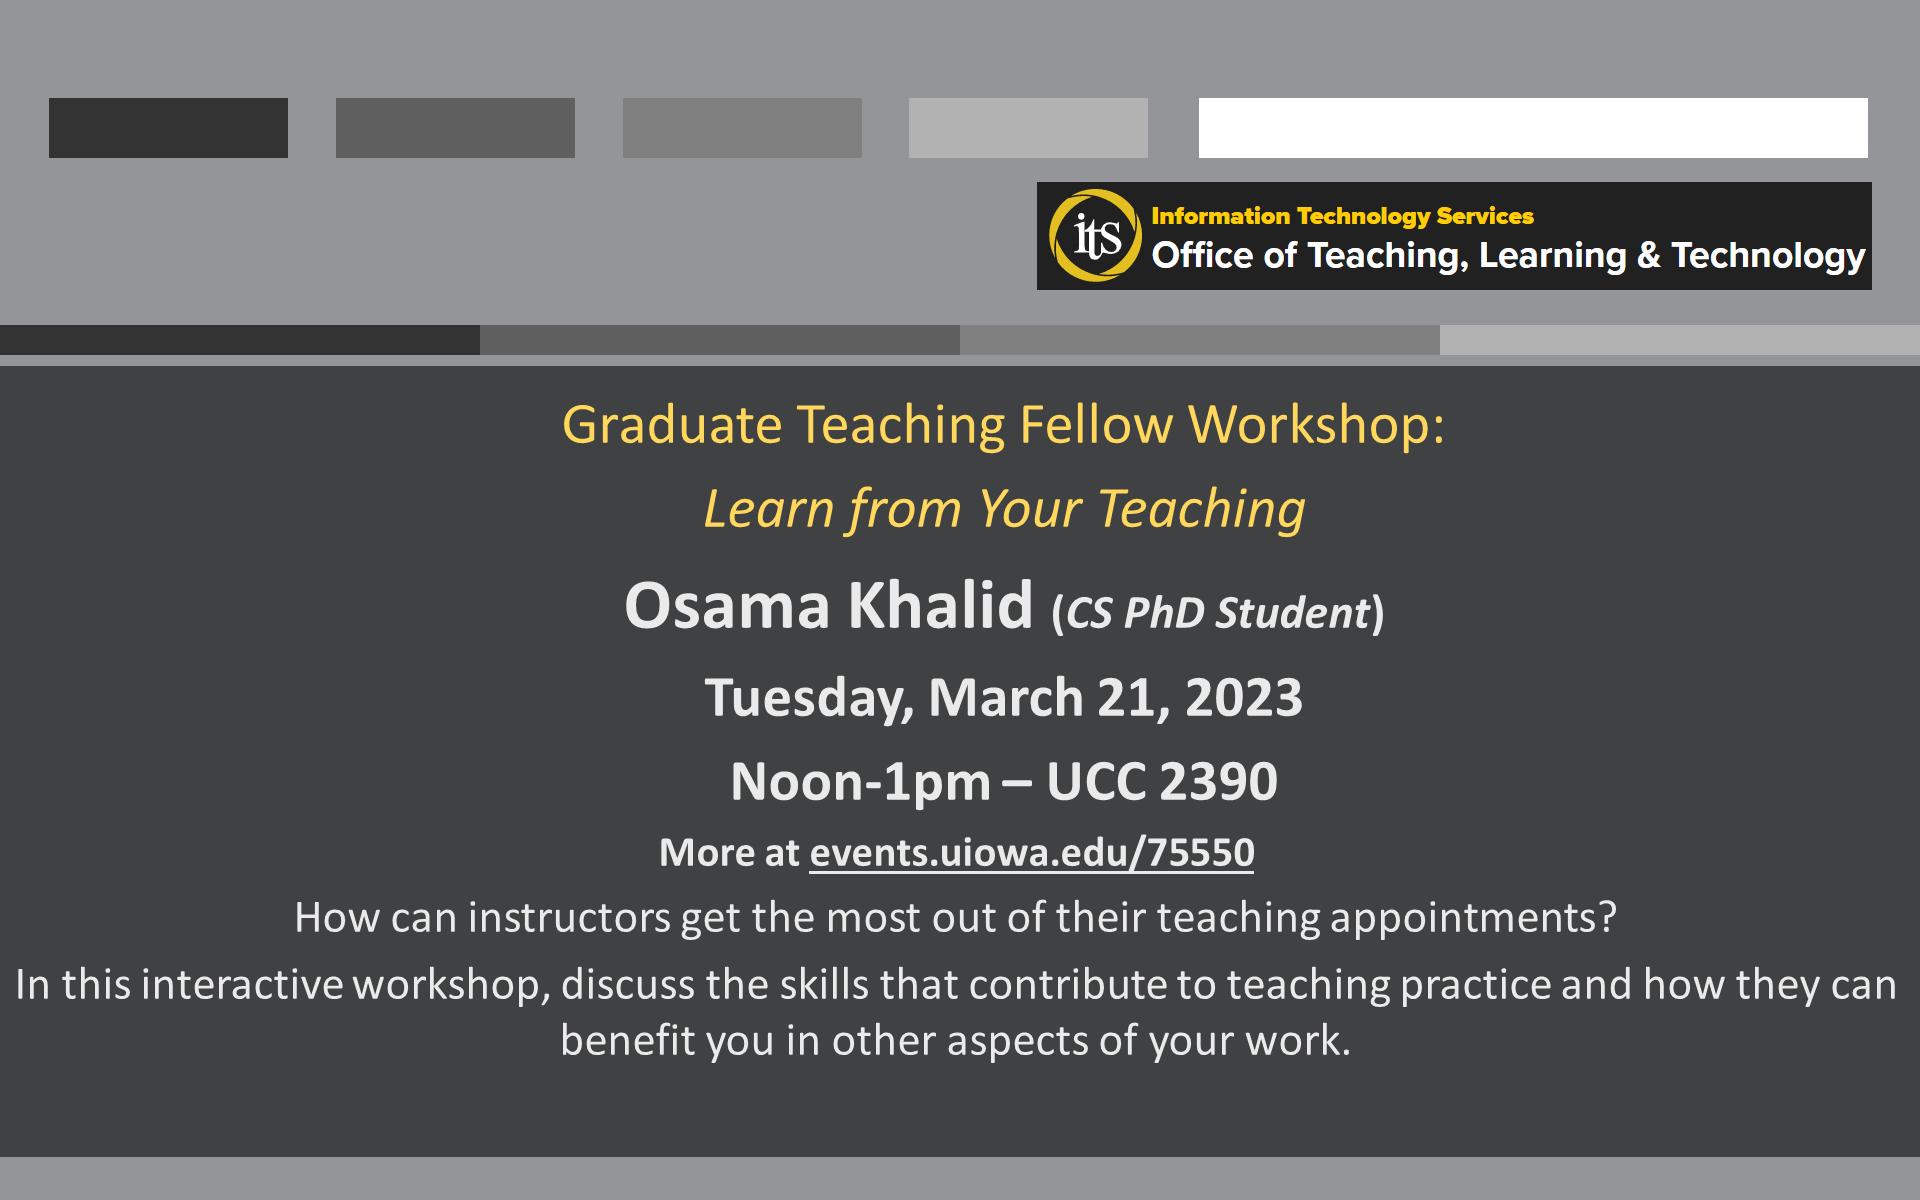 Graduate Teaching Fellow Workshop: Learn from Your Teaching Osama Khalid (CS PhD Student) Tuesday, March 21, 2023 Noon-1pm – UCC 2390 More at events.uiowa.edu/75550 How can instructors get the most out of their teaching appointments? In this interactive workshop, discuss the skills that contribute to teaching practice and how they can benefit you in other aspects of your work.